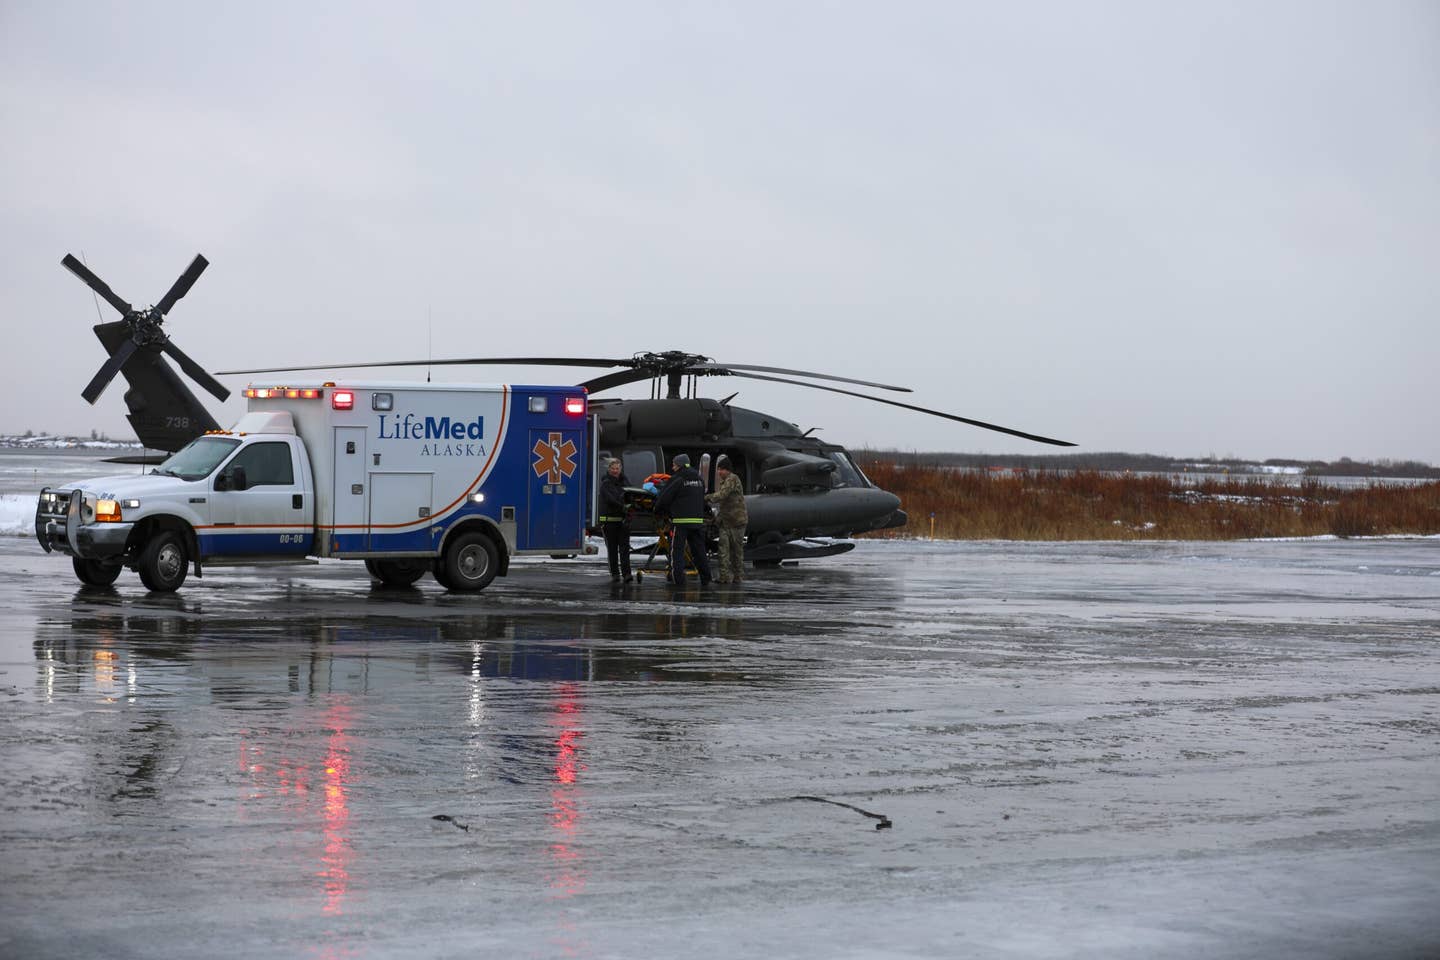 <em>The patient is transferred to the LifeMed ambulance (Alaska National Guard)</em>